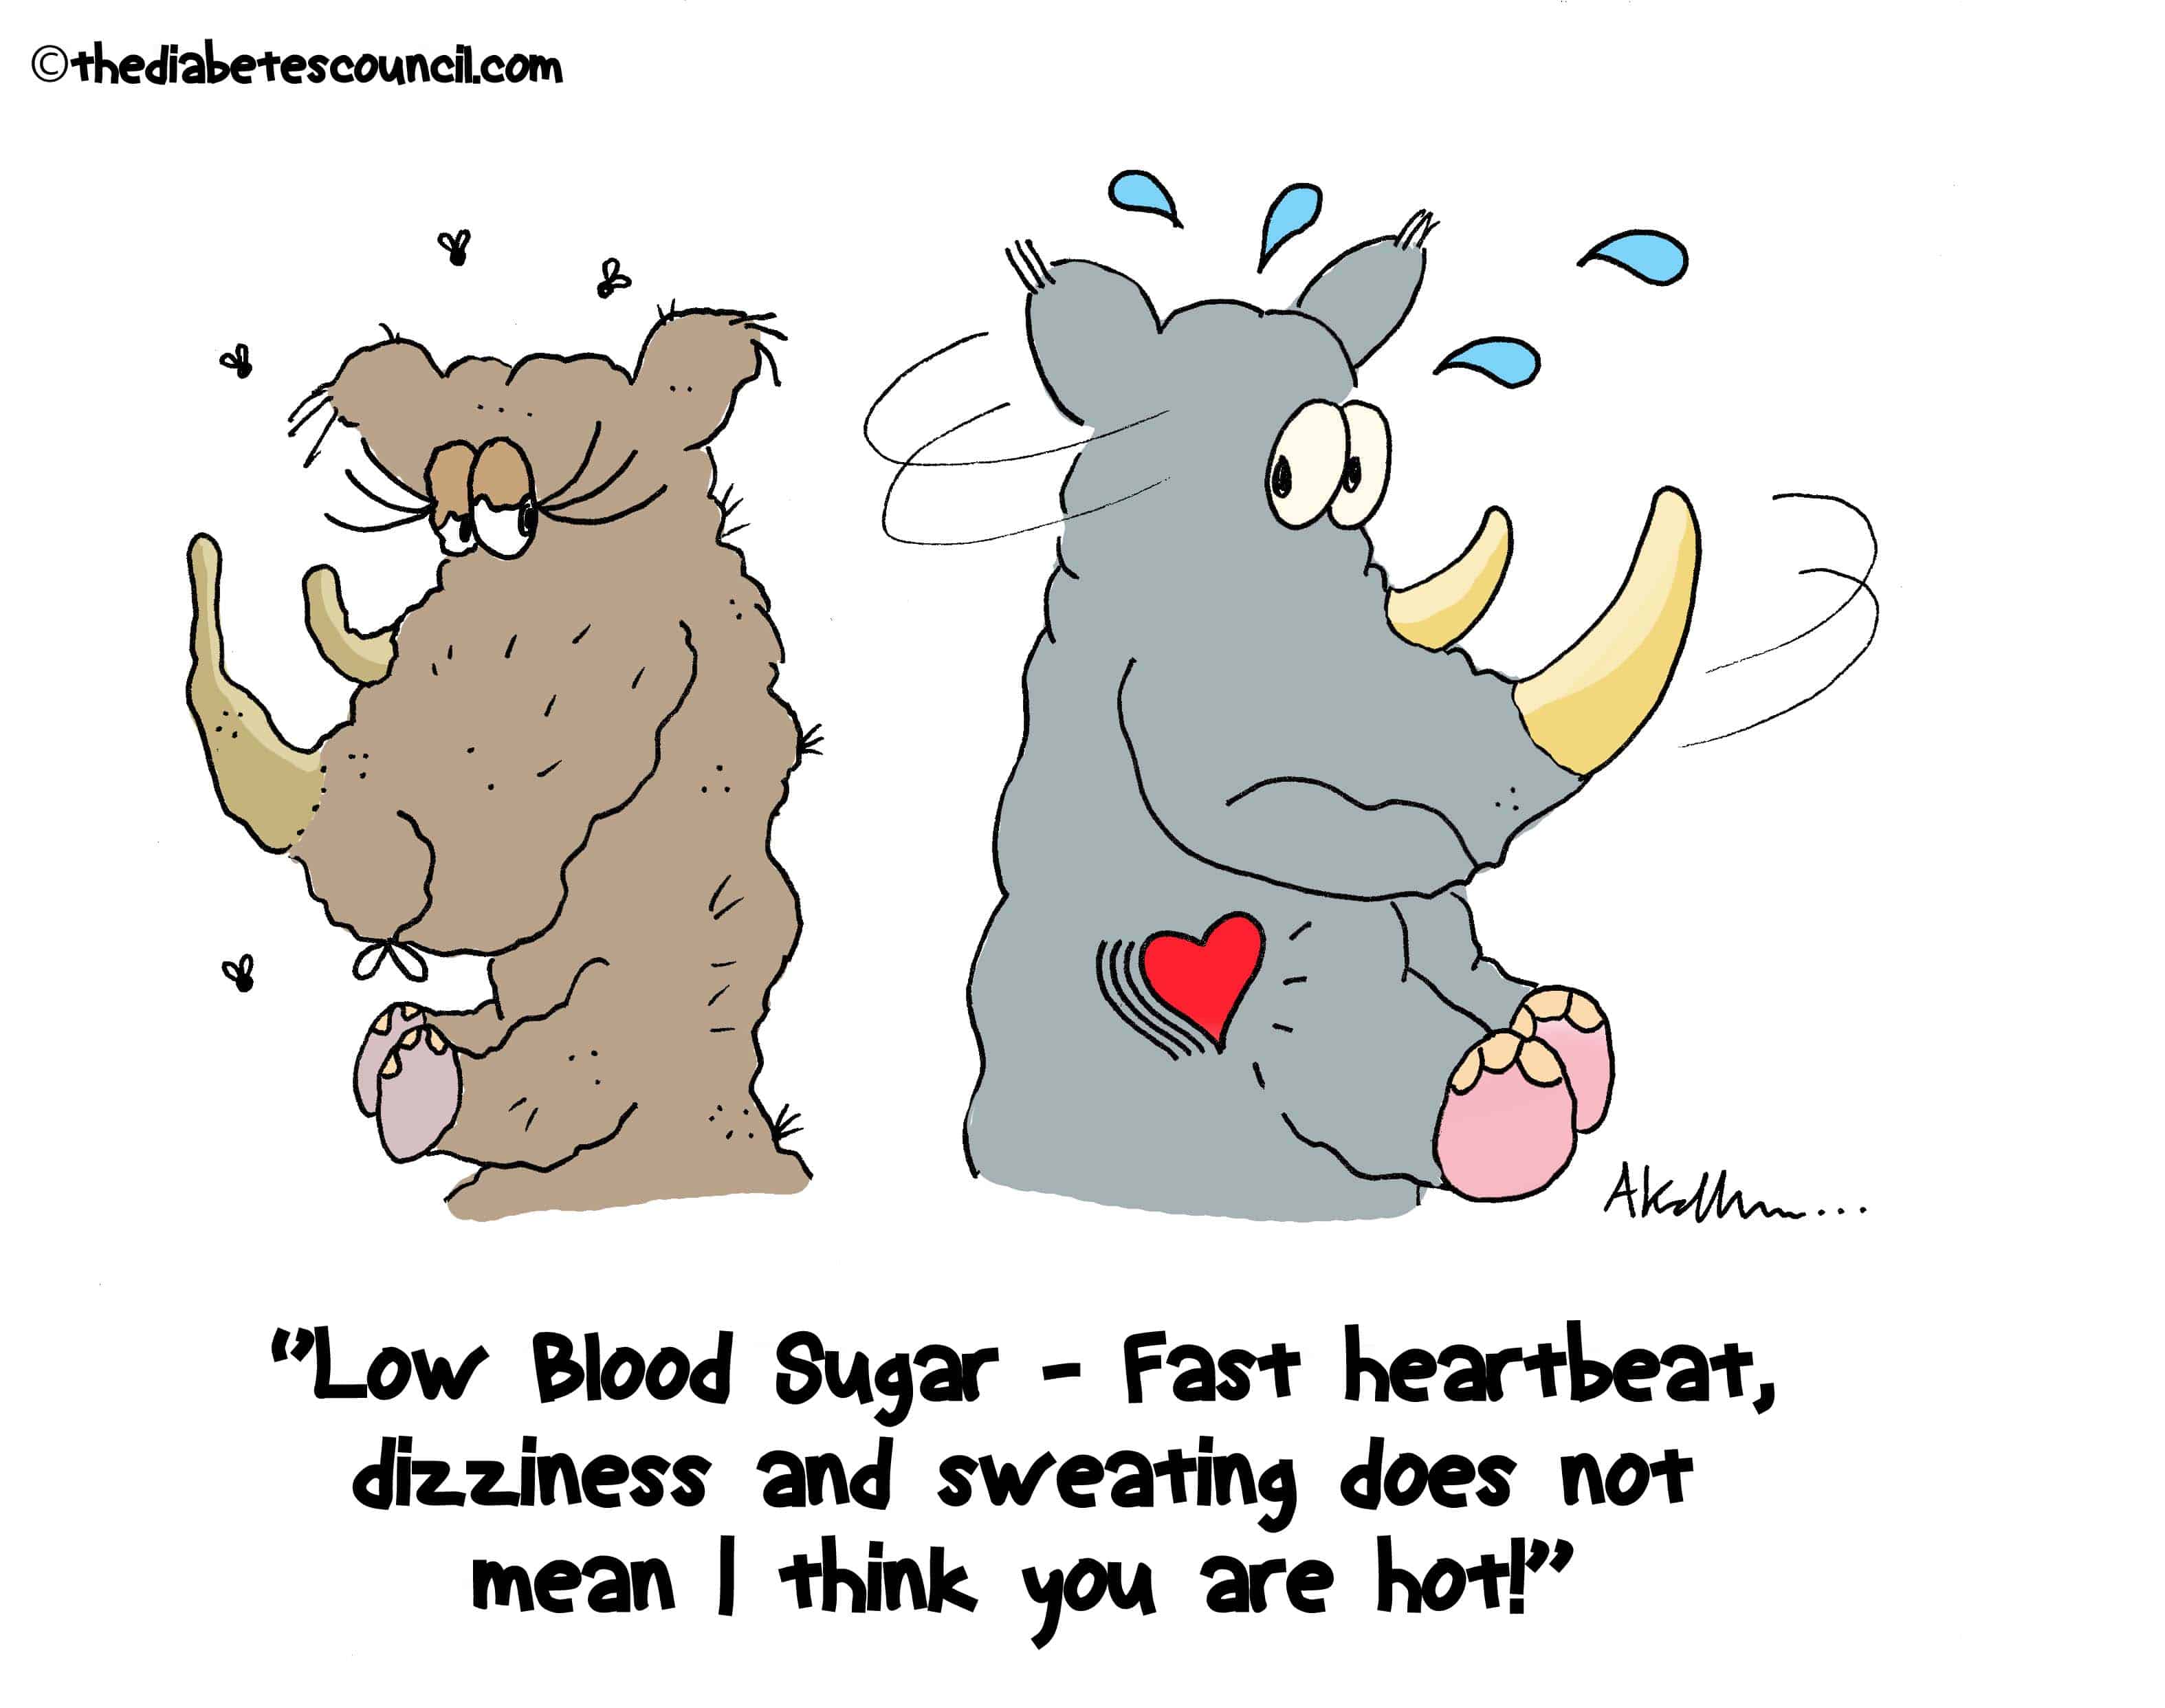 signs and symptoms of low blood sugar